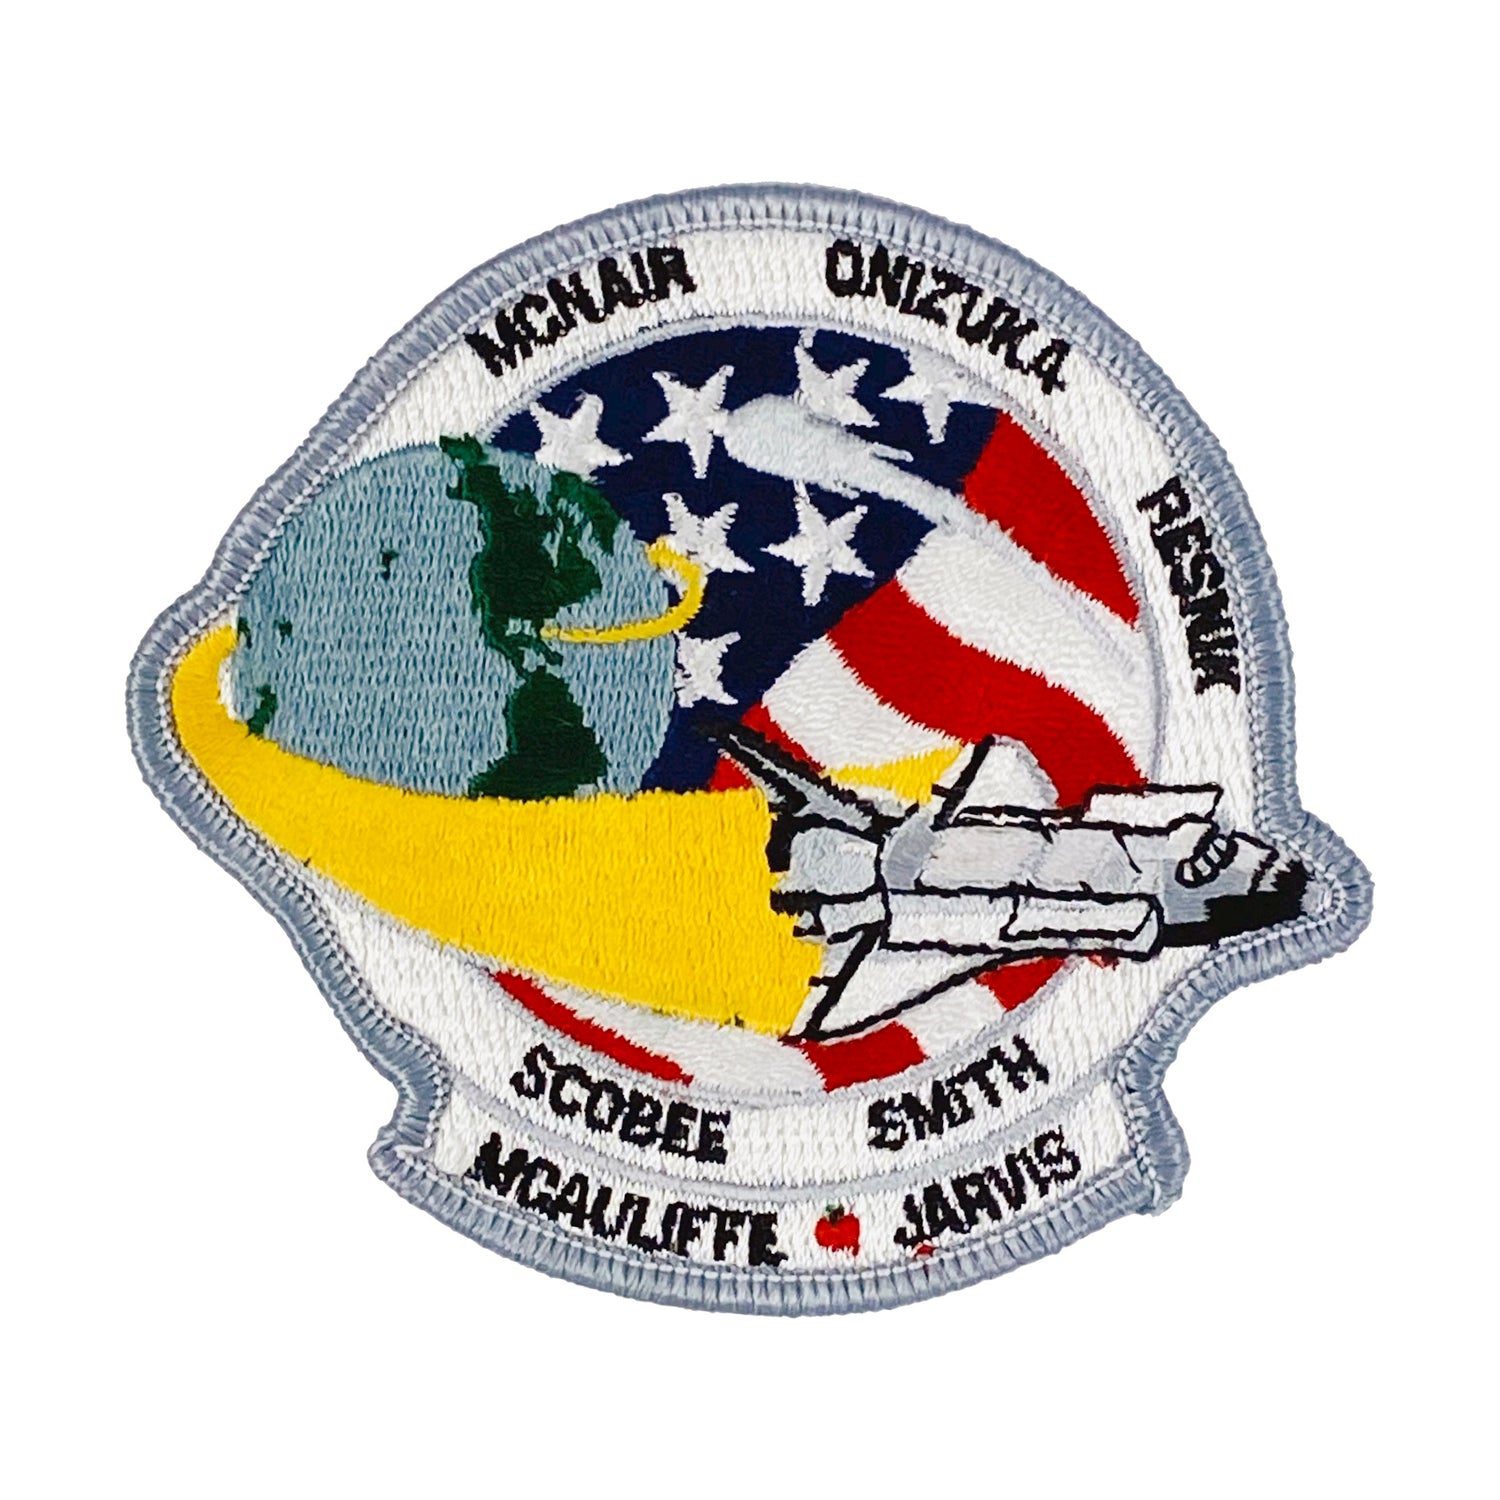 SPACE SHUTTLE CHALLENGER PATCH